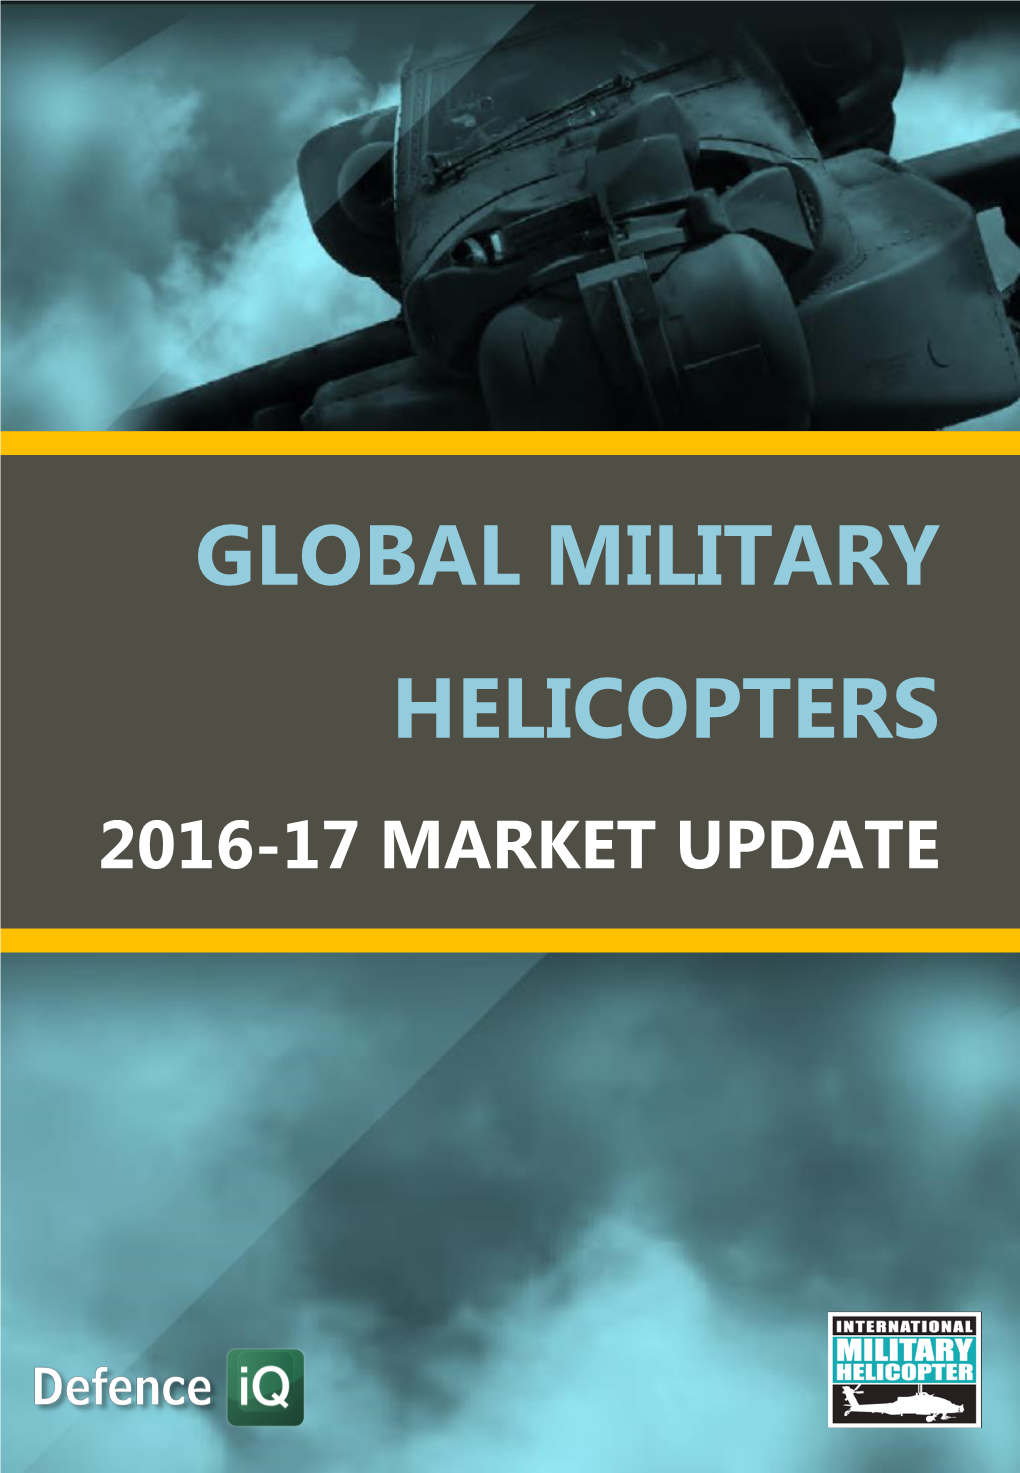 Global Military Helicopters 2016-17 Market Update Contents